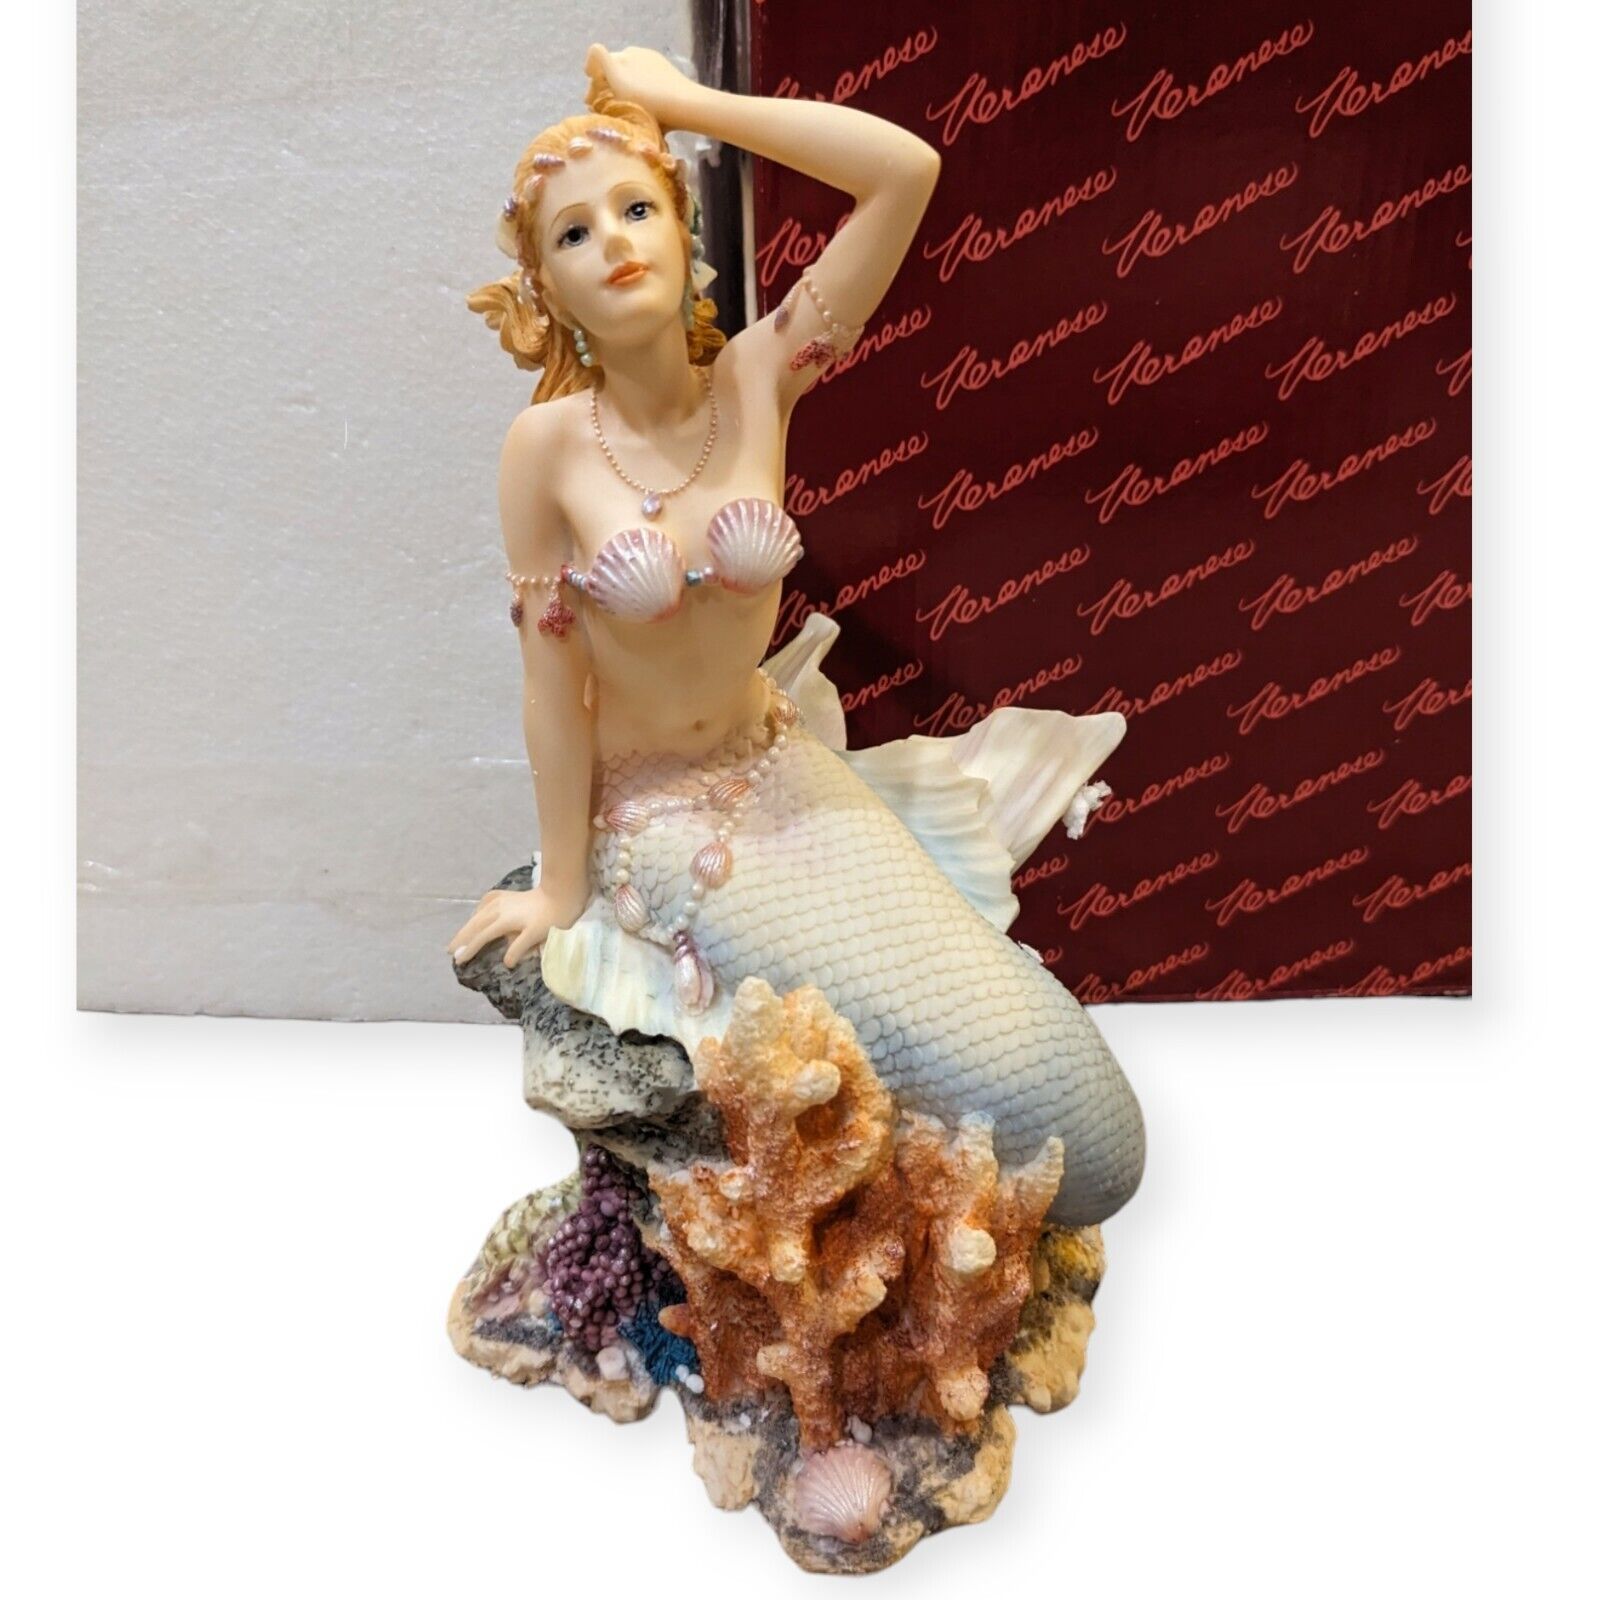 Veronese Mermaid Statue Hand Painted 2002 Coral With Box And Packing